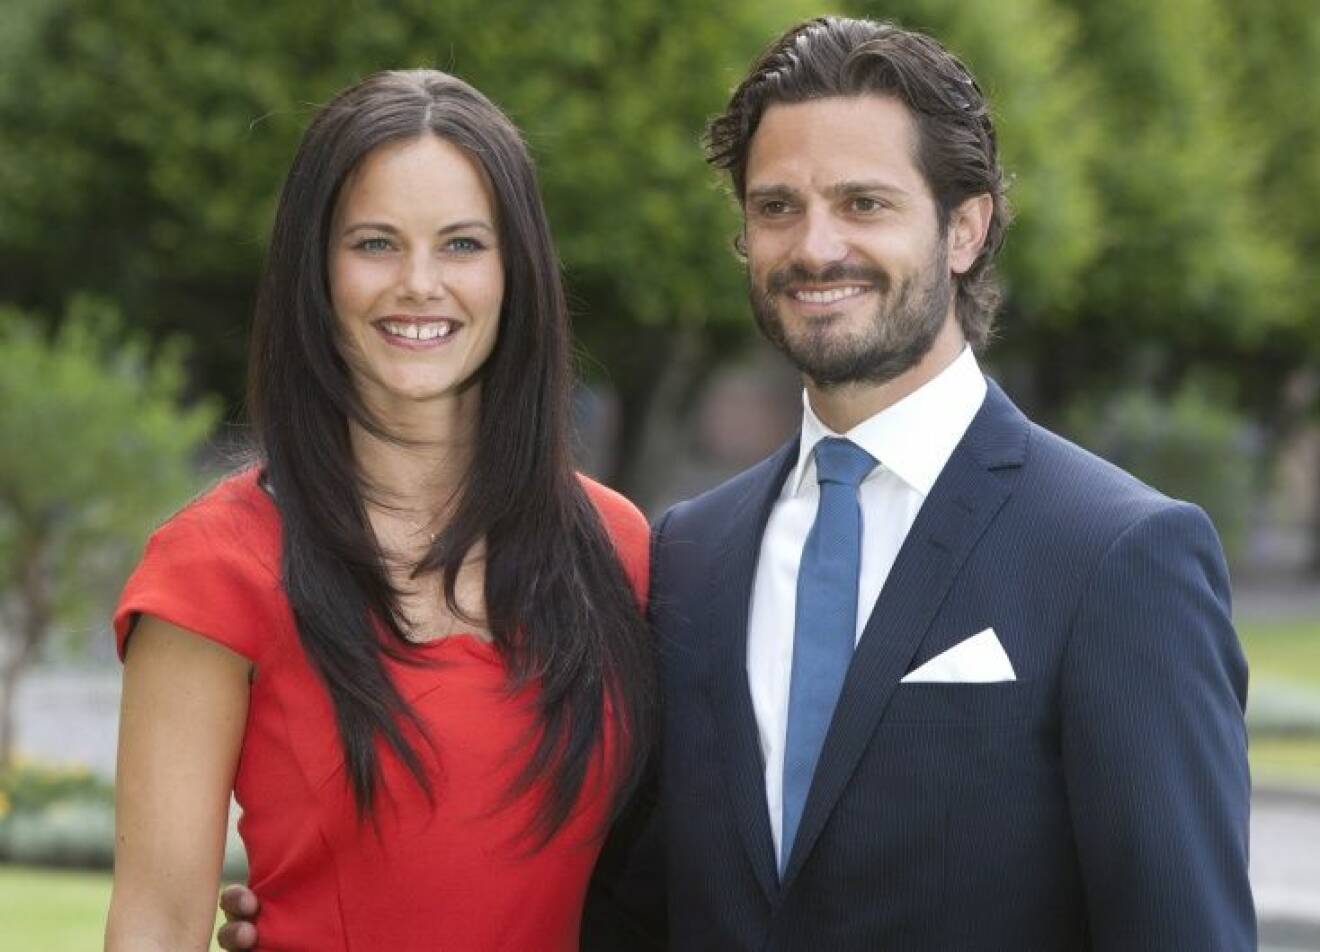 Prince Carl Philip and Sofia Hellqvist are engaged to be married